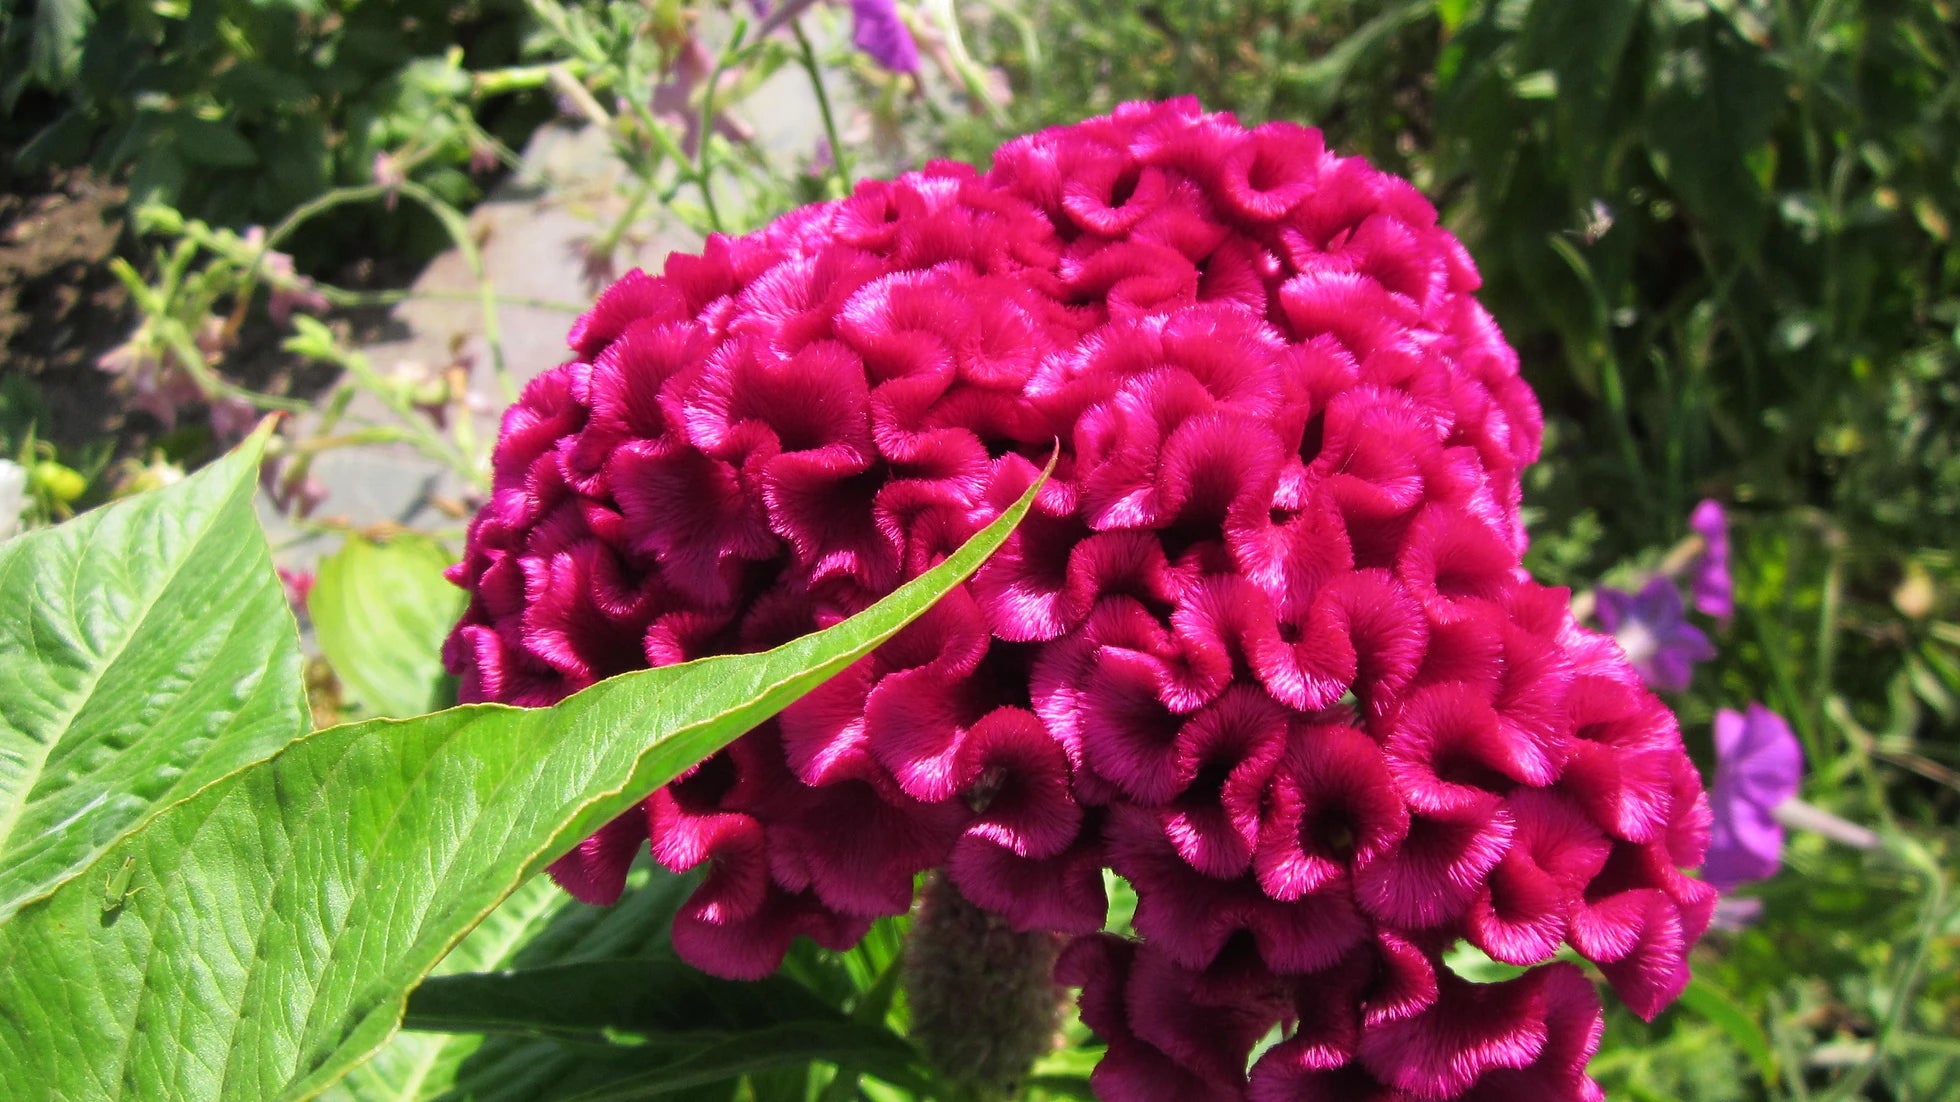 Brim Seed Co. - Crested Cockscomb Celosia Flower Heirloom Seed